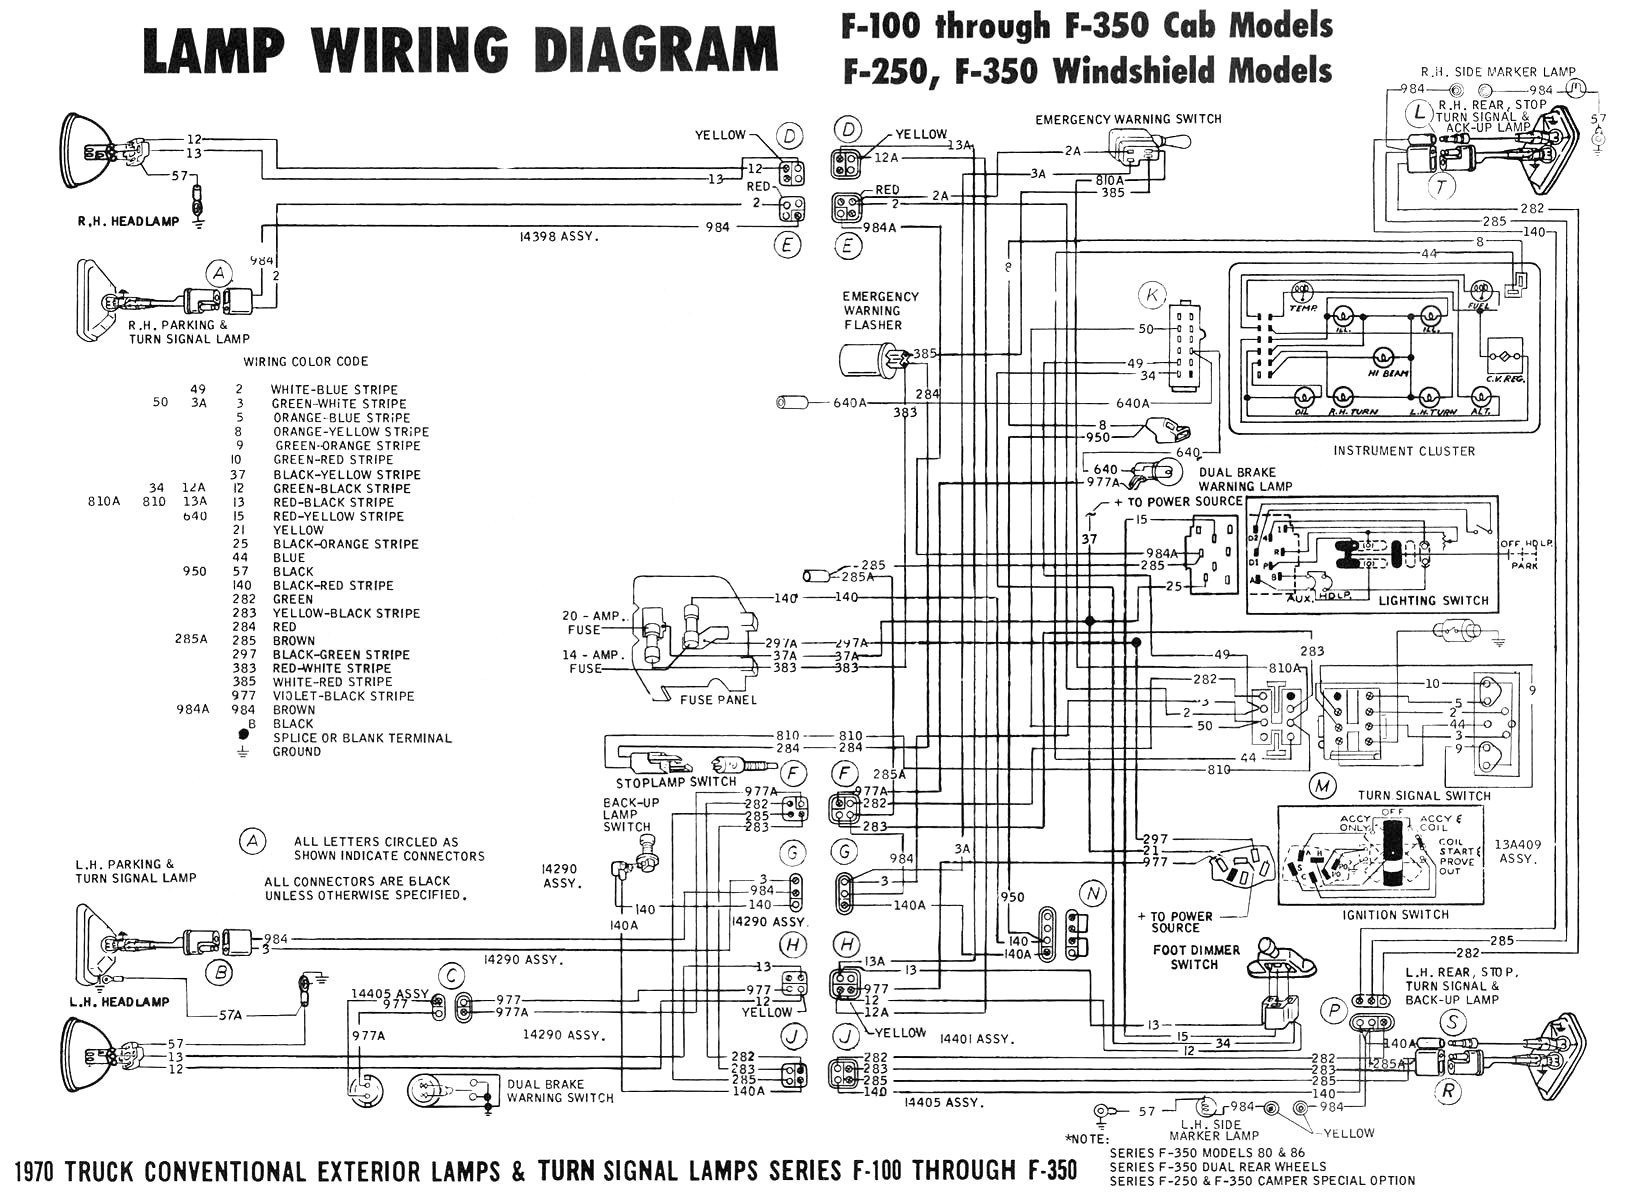 1967 Mustang Ignition Wiring Diagram 1967 Mustang Ignition Switch Wiring Lzk Gallery Wiring Diagrams